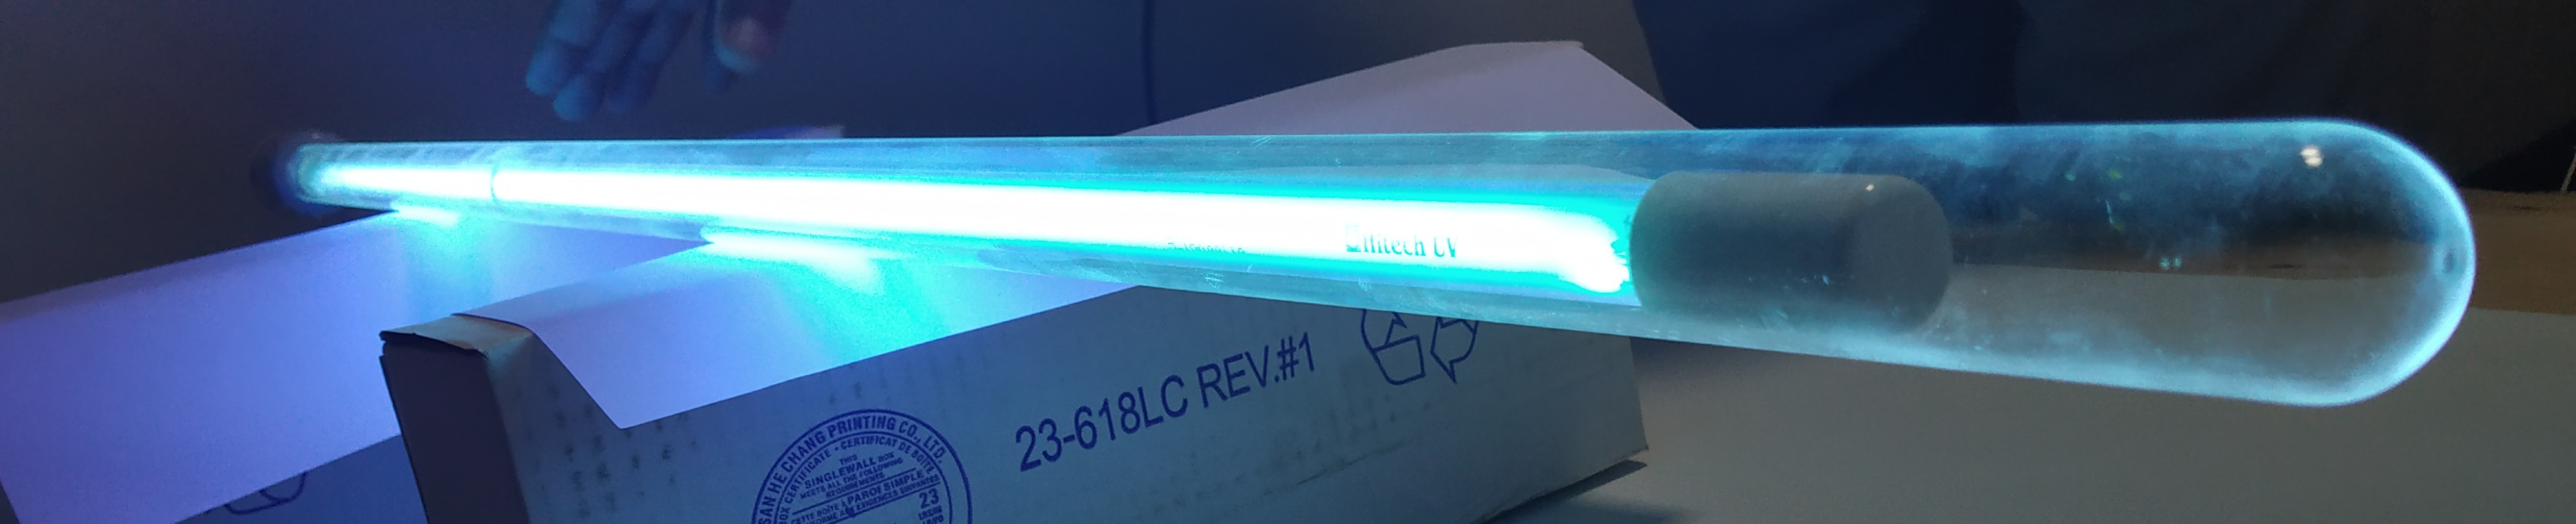 sleeve and is made of quartz is clear tube that protects a UV lamp.